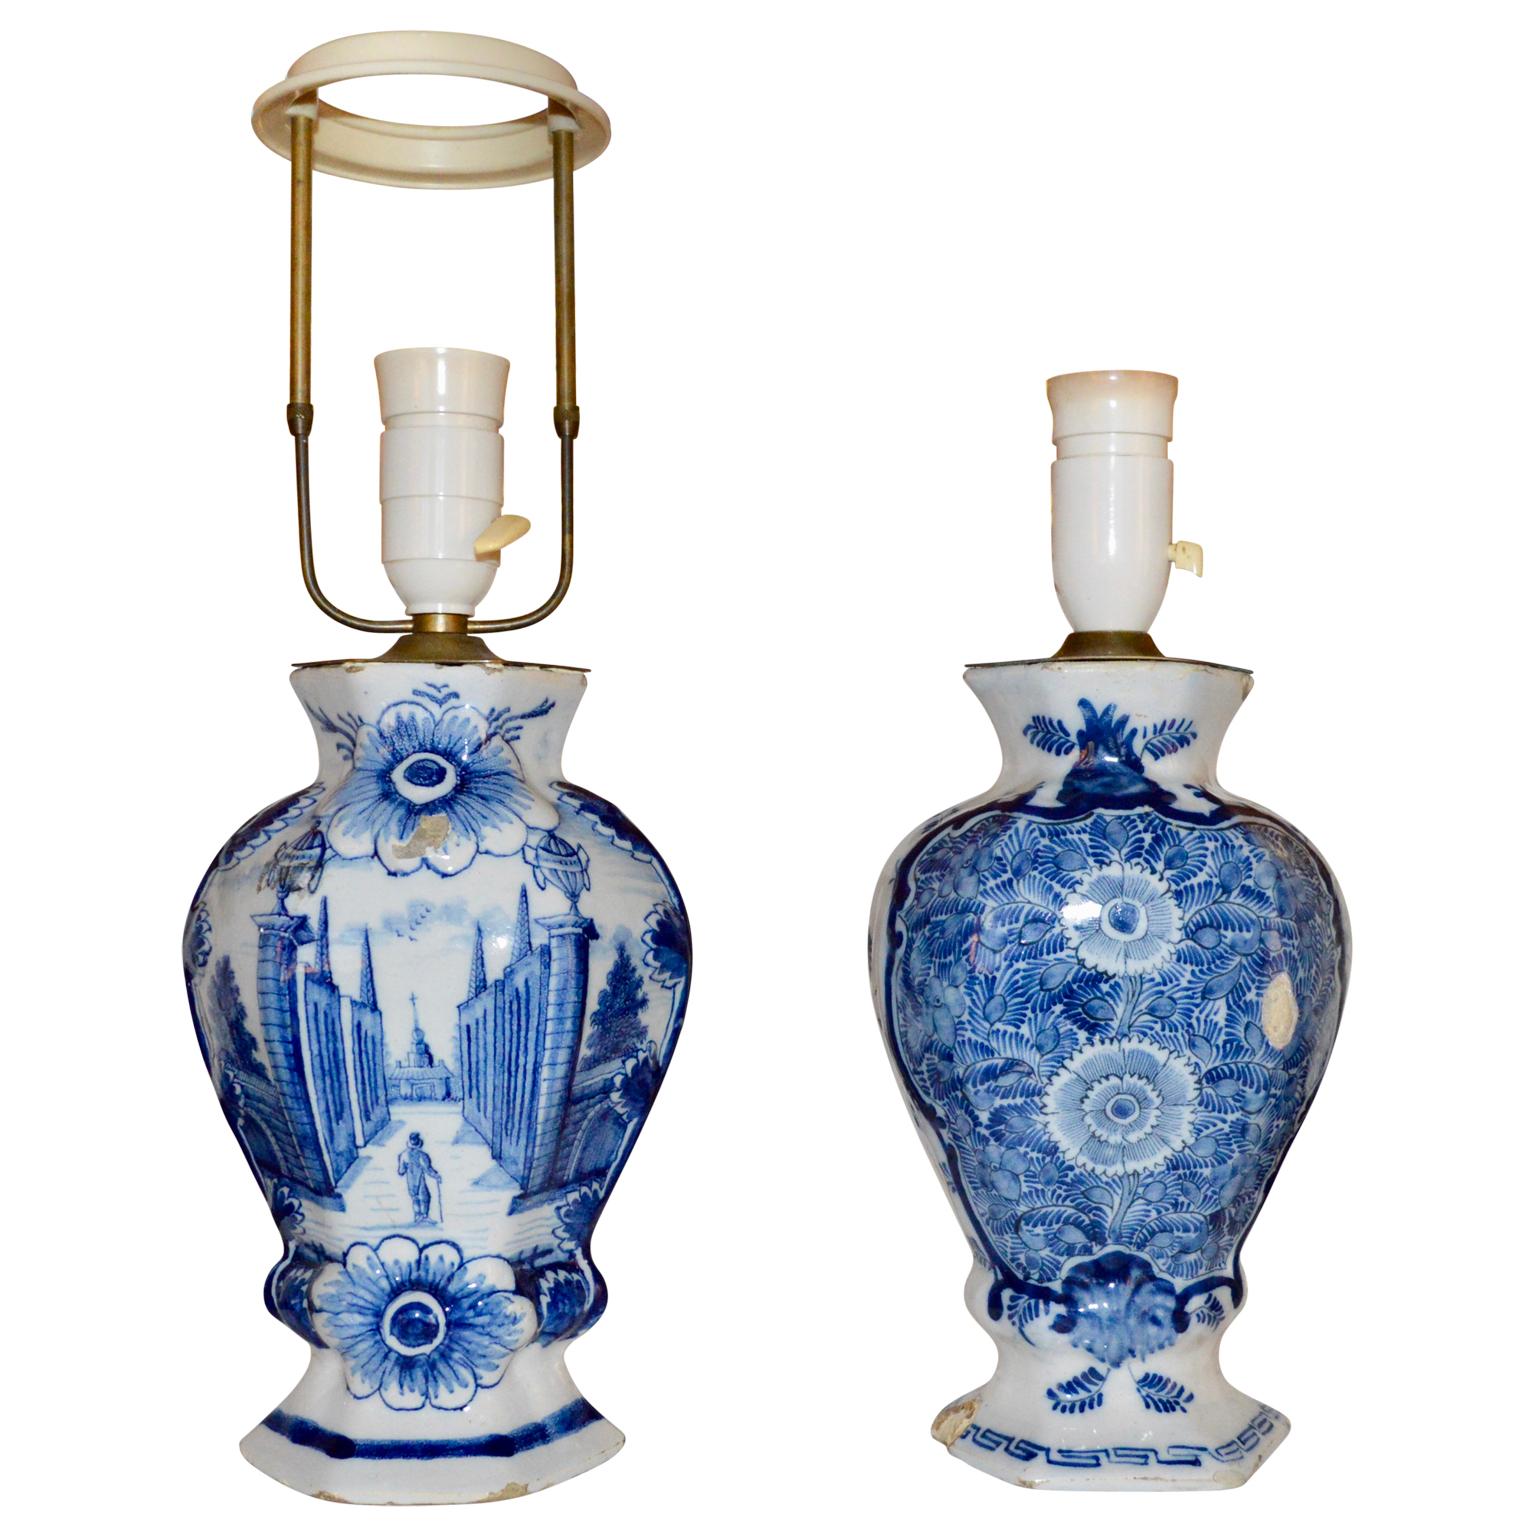 Pair of 18th century blue and white delft table lamps with brass hardware
Height of vase only is 9.5 inches.